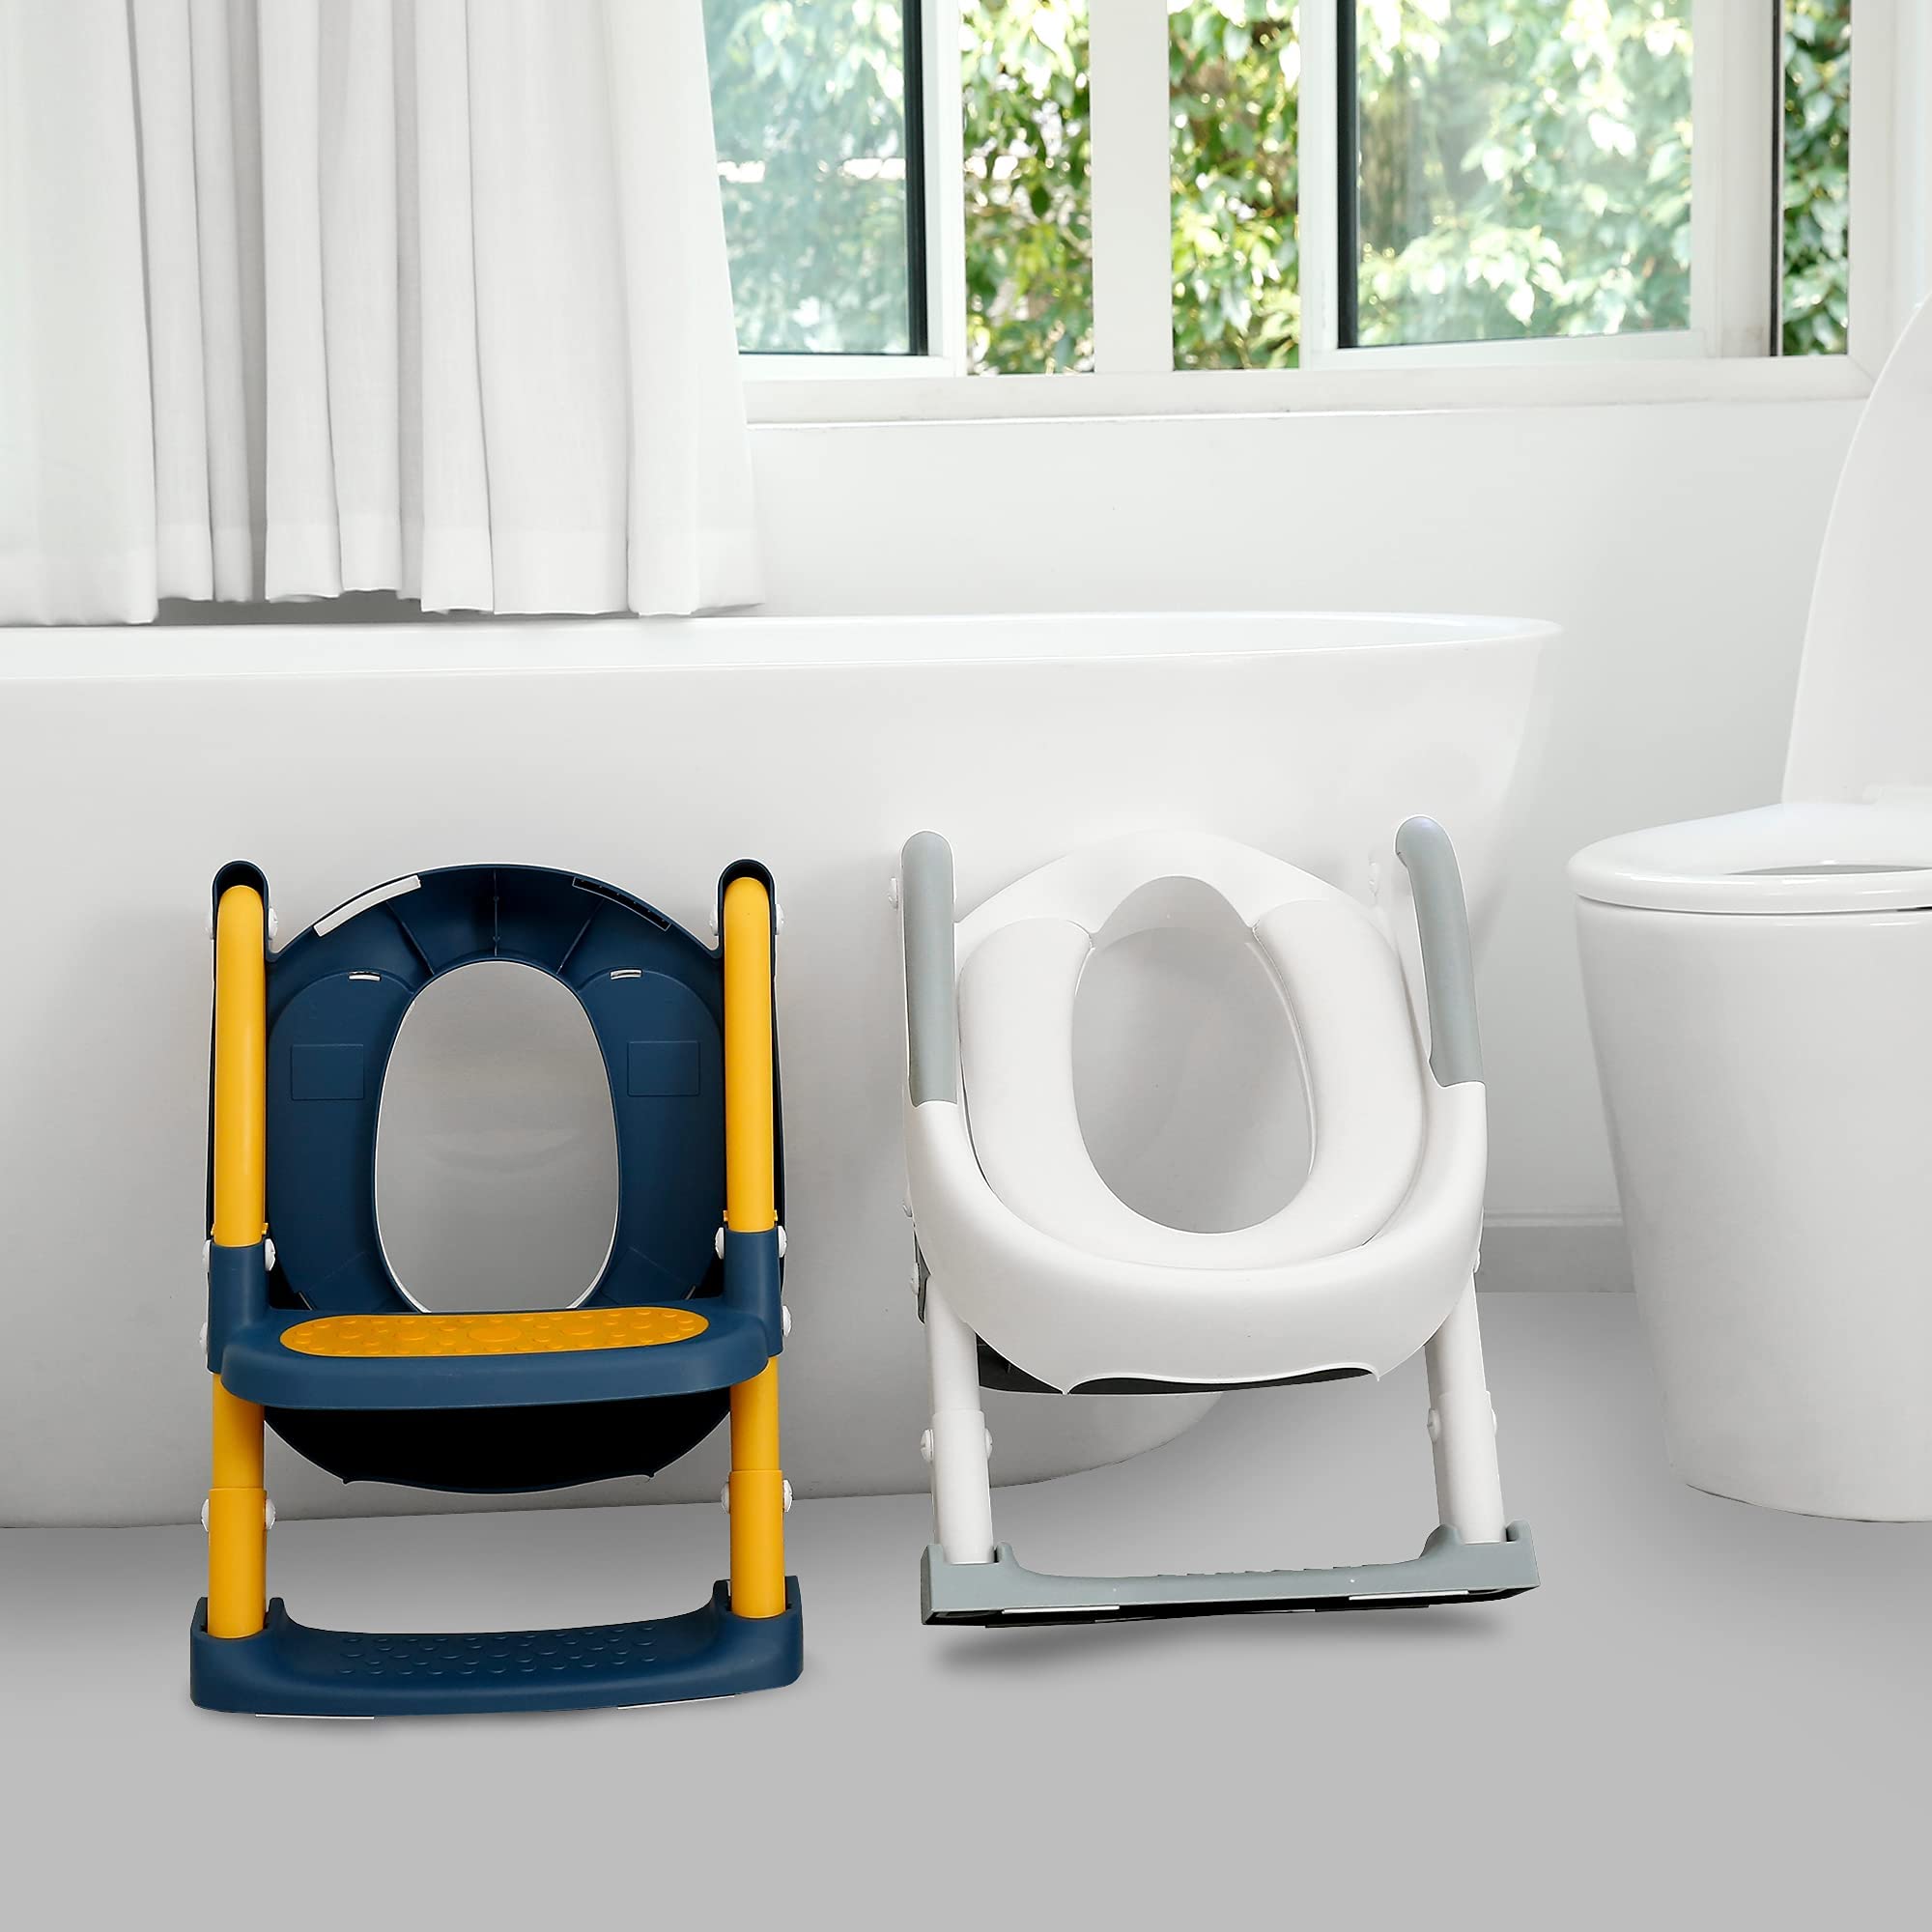 Kylinton® Potty Training Seat with Step Stool Ladder, Foldable Toddler Potty  Seat for Toilet 2 in 1 Potty Training Toilet for Kids, Splash Guard  Comfotable and Anti-Slip Pad for Boys Girls, Blue 